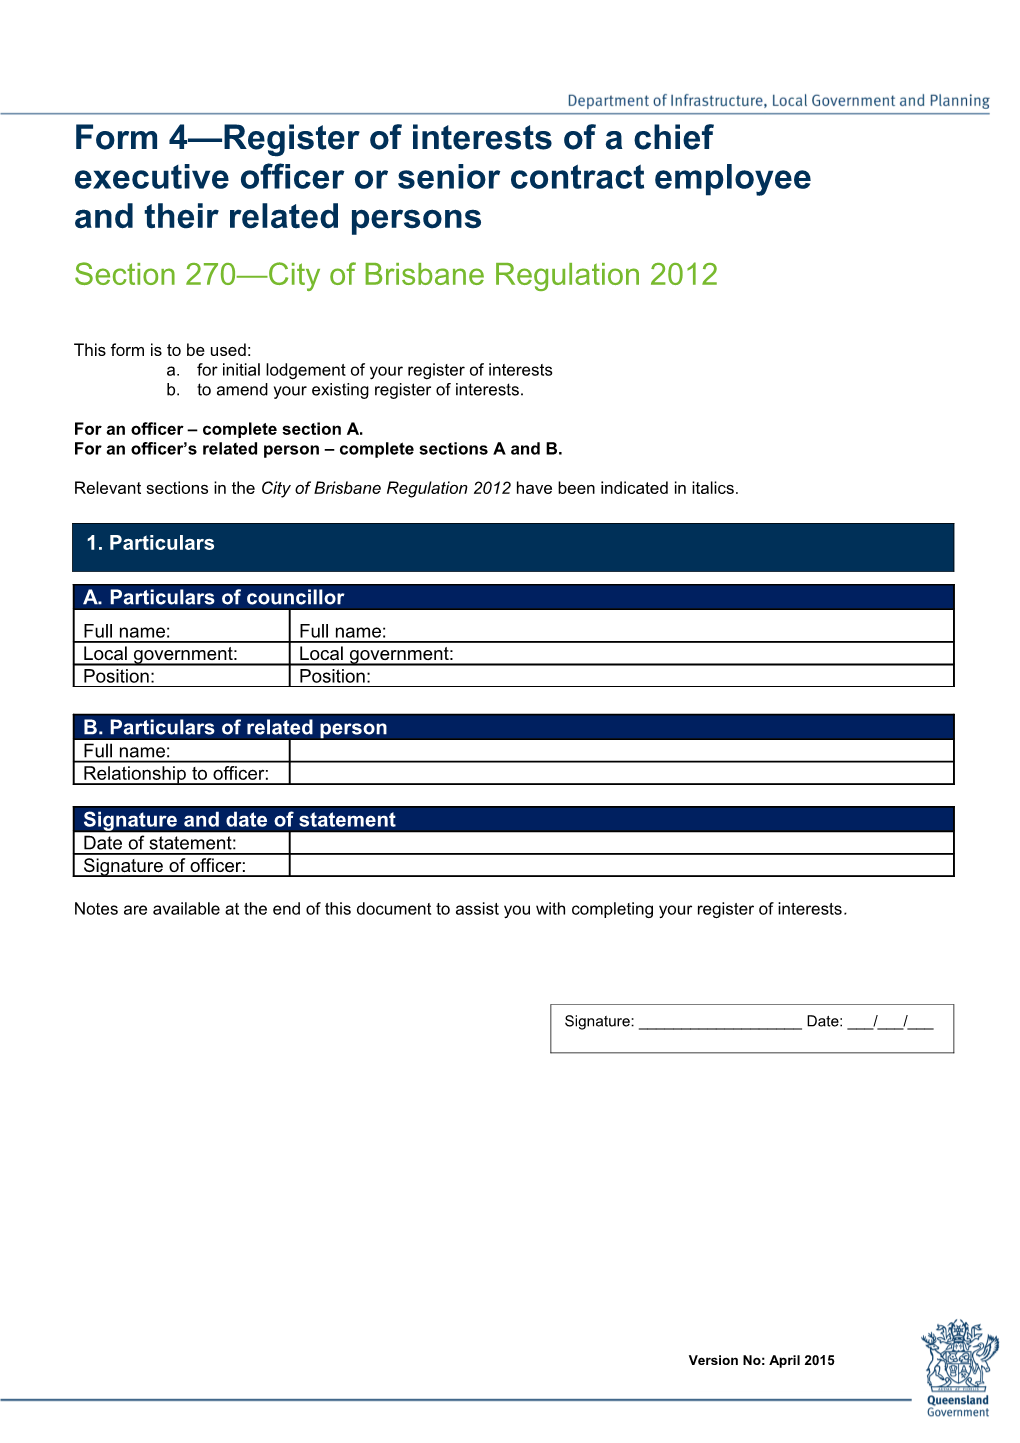 Form 4 - Register of Interests of a Chief Executive Officer Or Senior Contract Employee